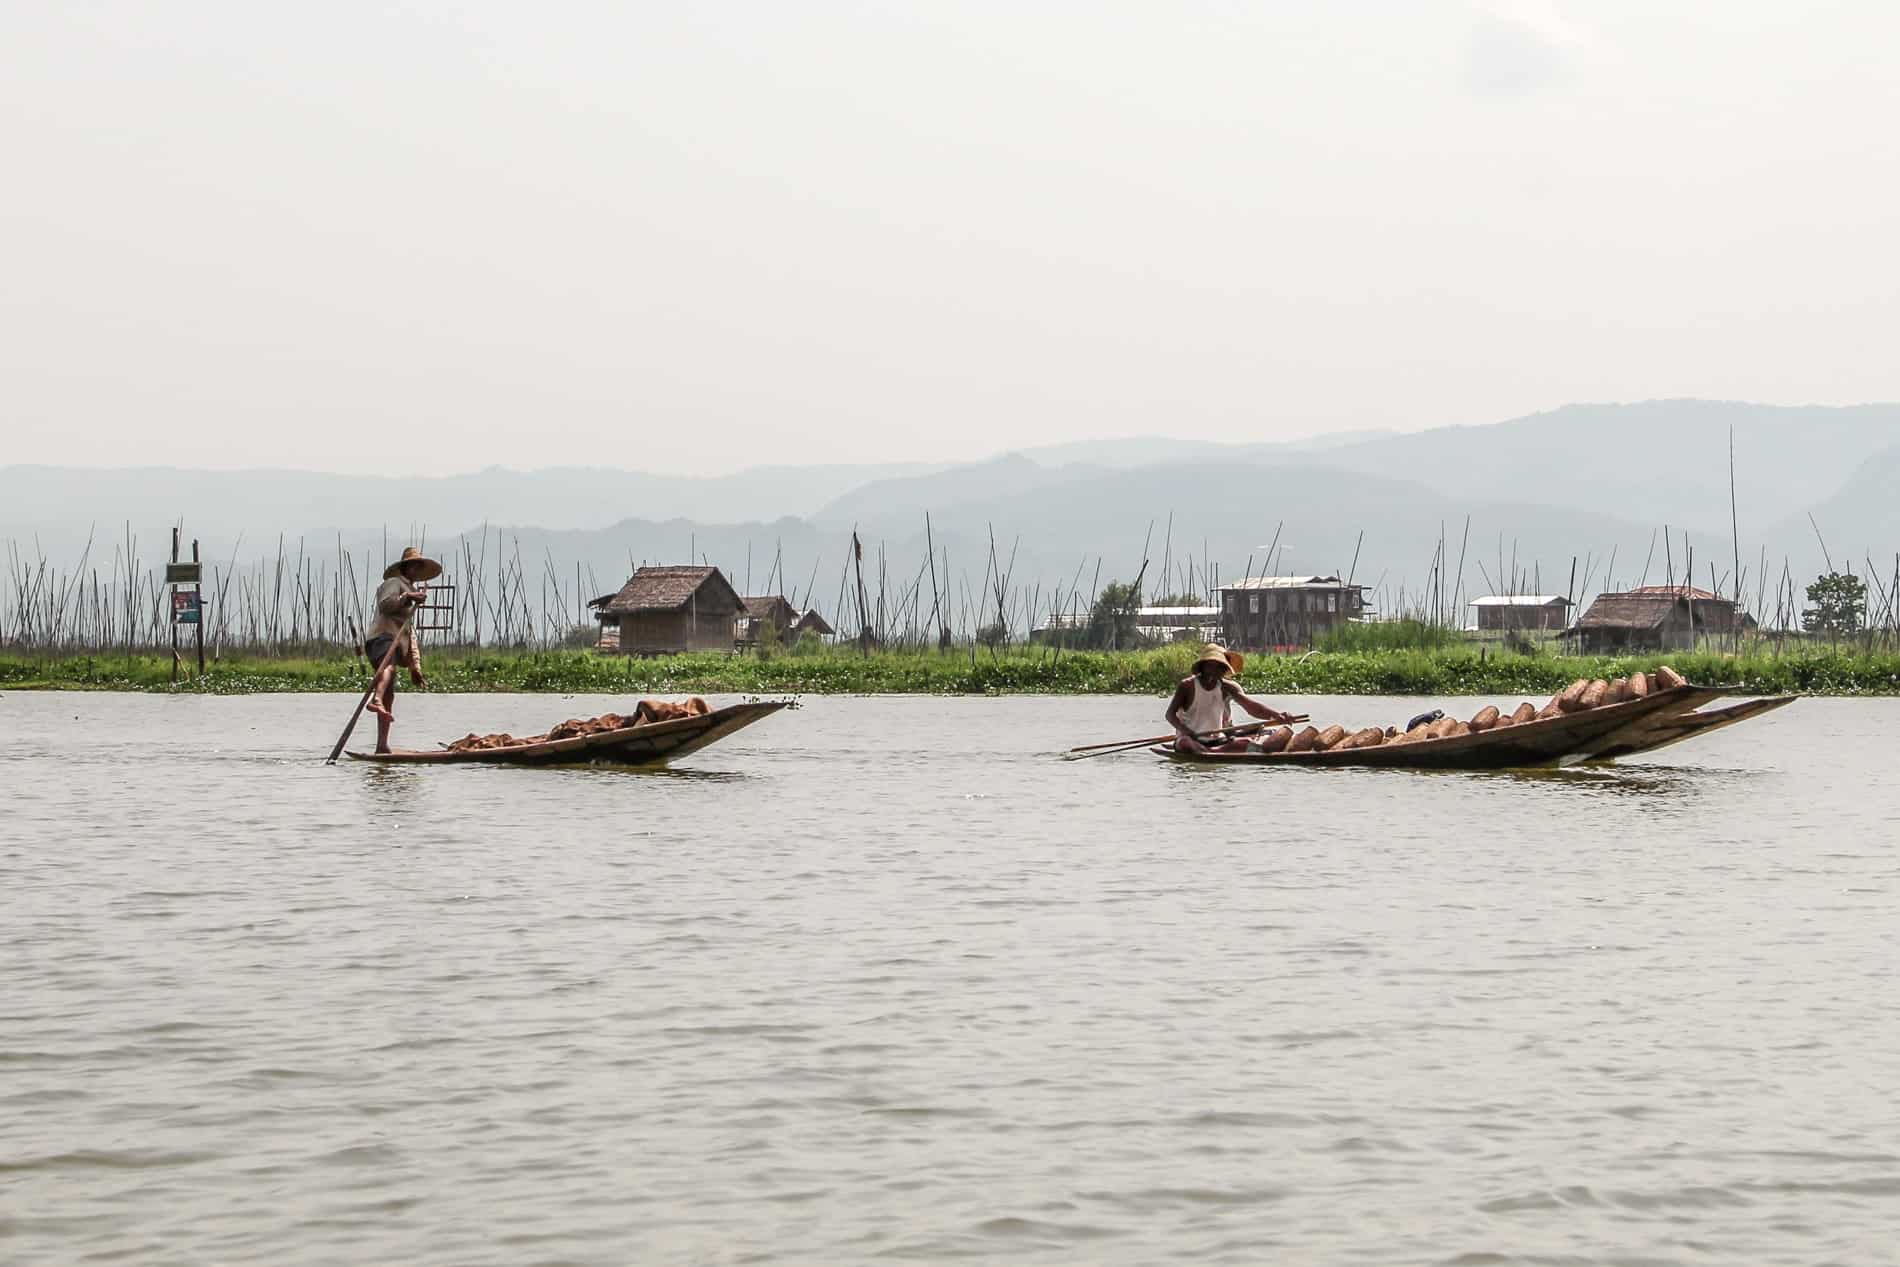 In front of a floating village in Inle Lake, a fisherman stands on the end of his boat rowing the oar with his leg. In front of him a man sits in his boat, heavy with solid objects. 